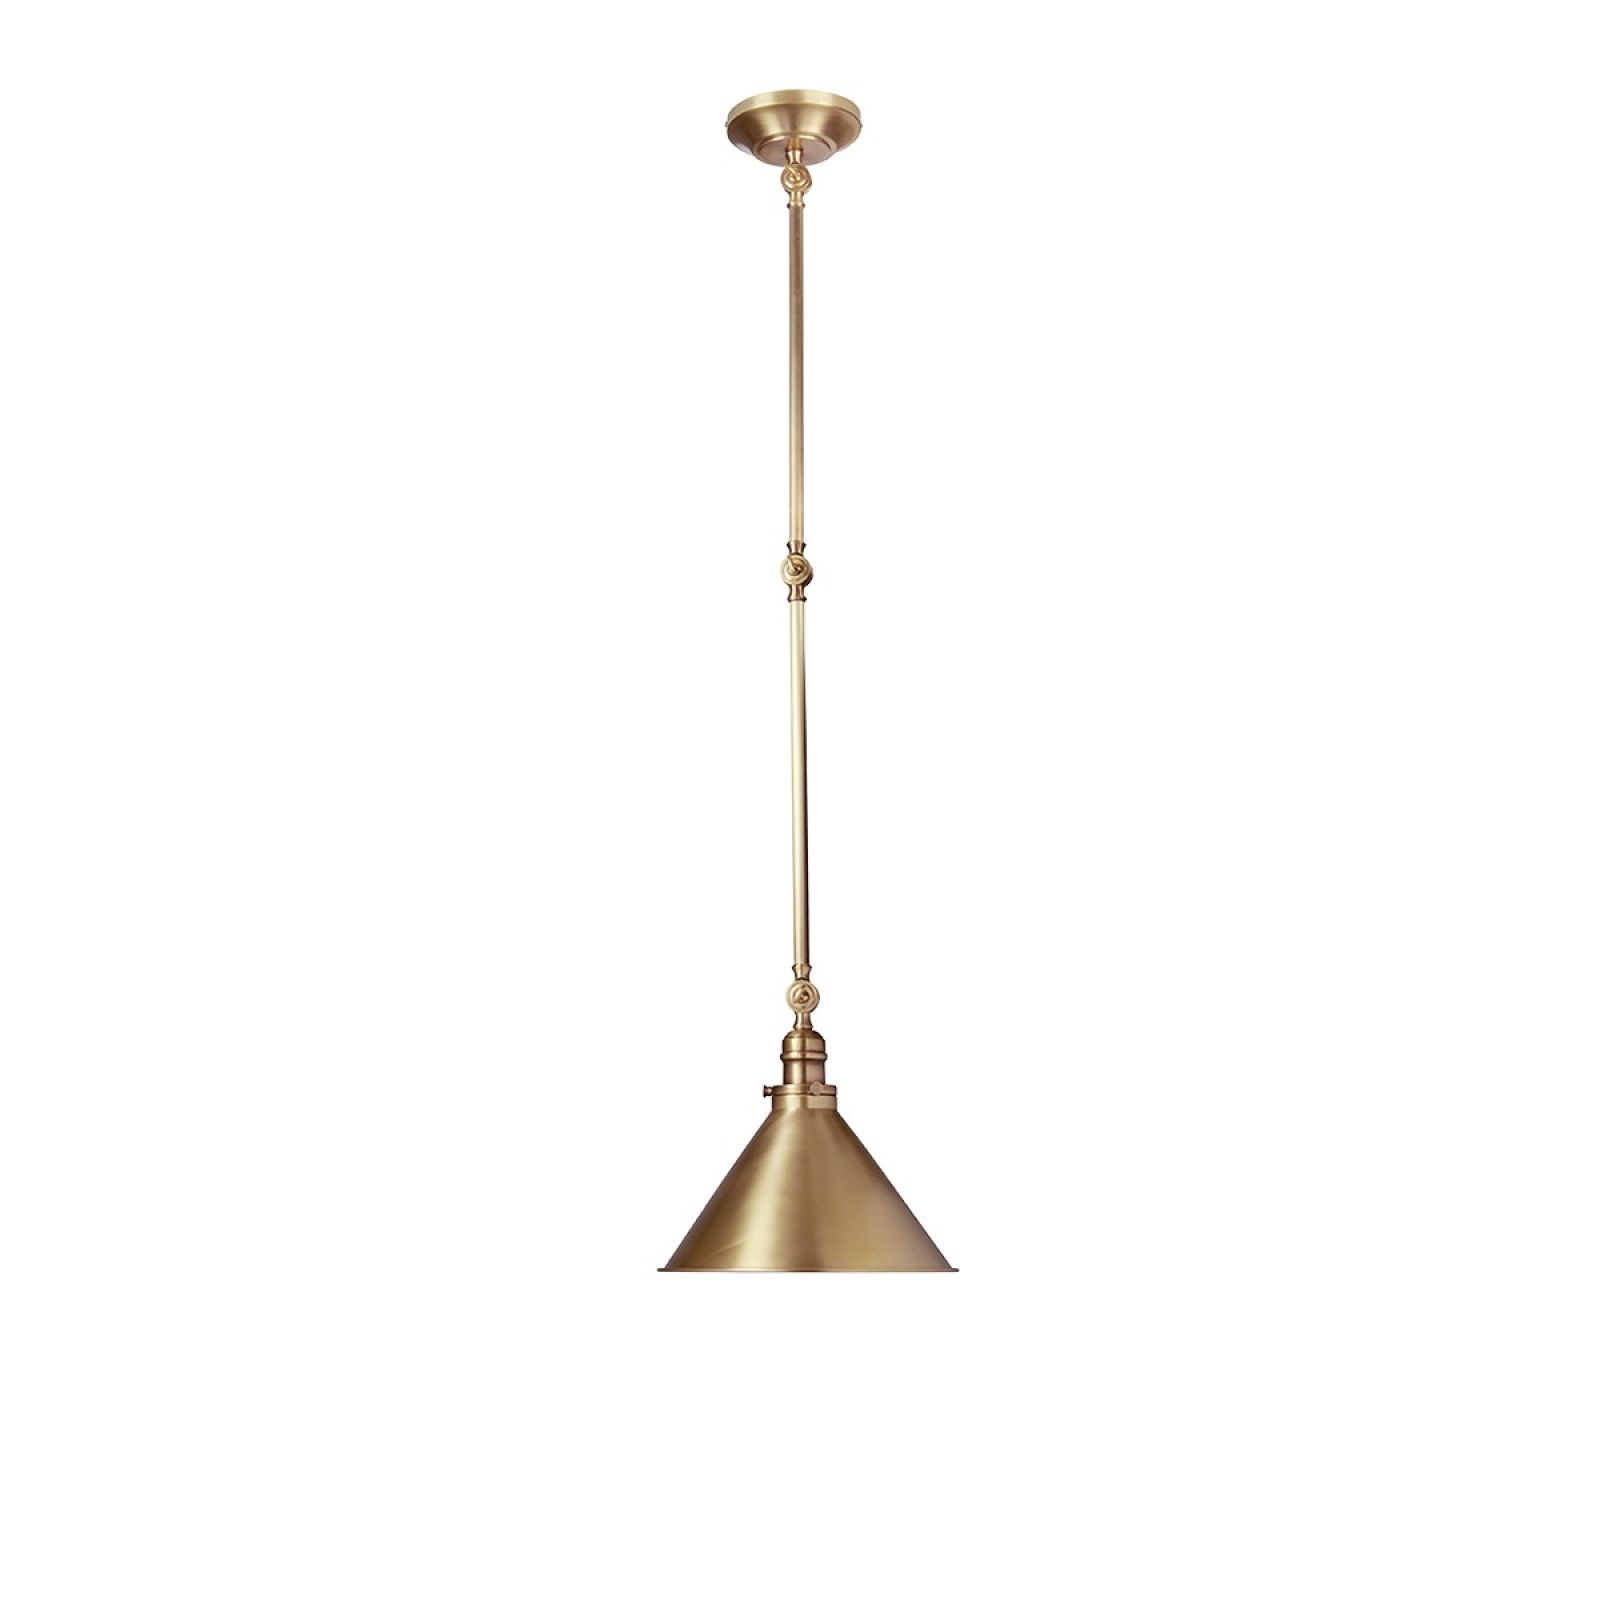 Provence large wall light/pendant light in Aged Brass